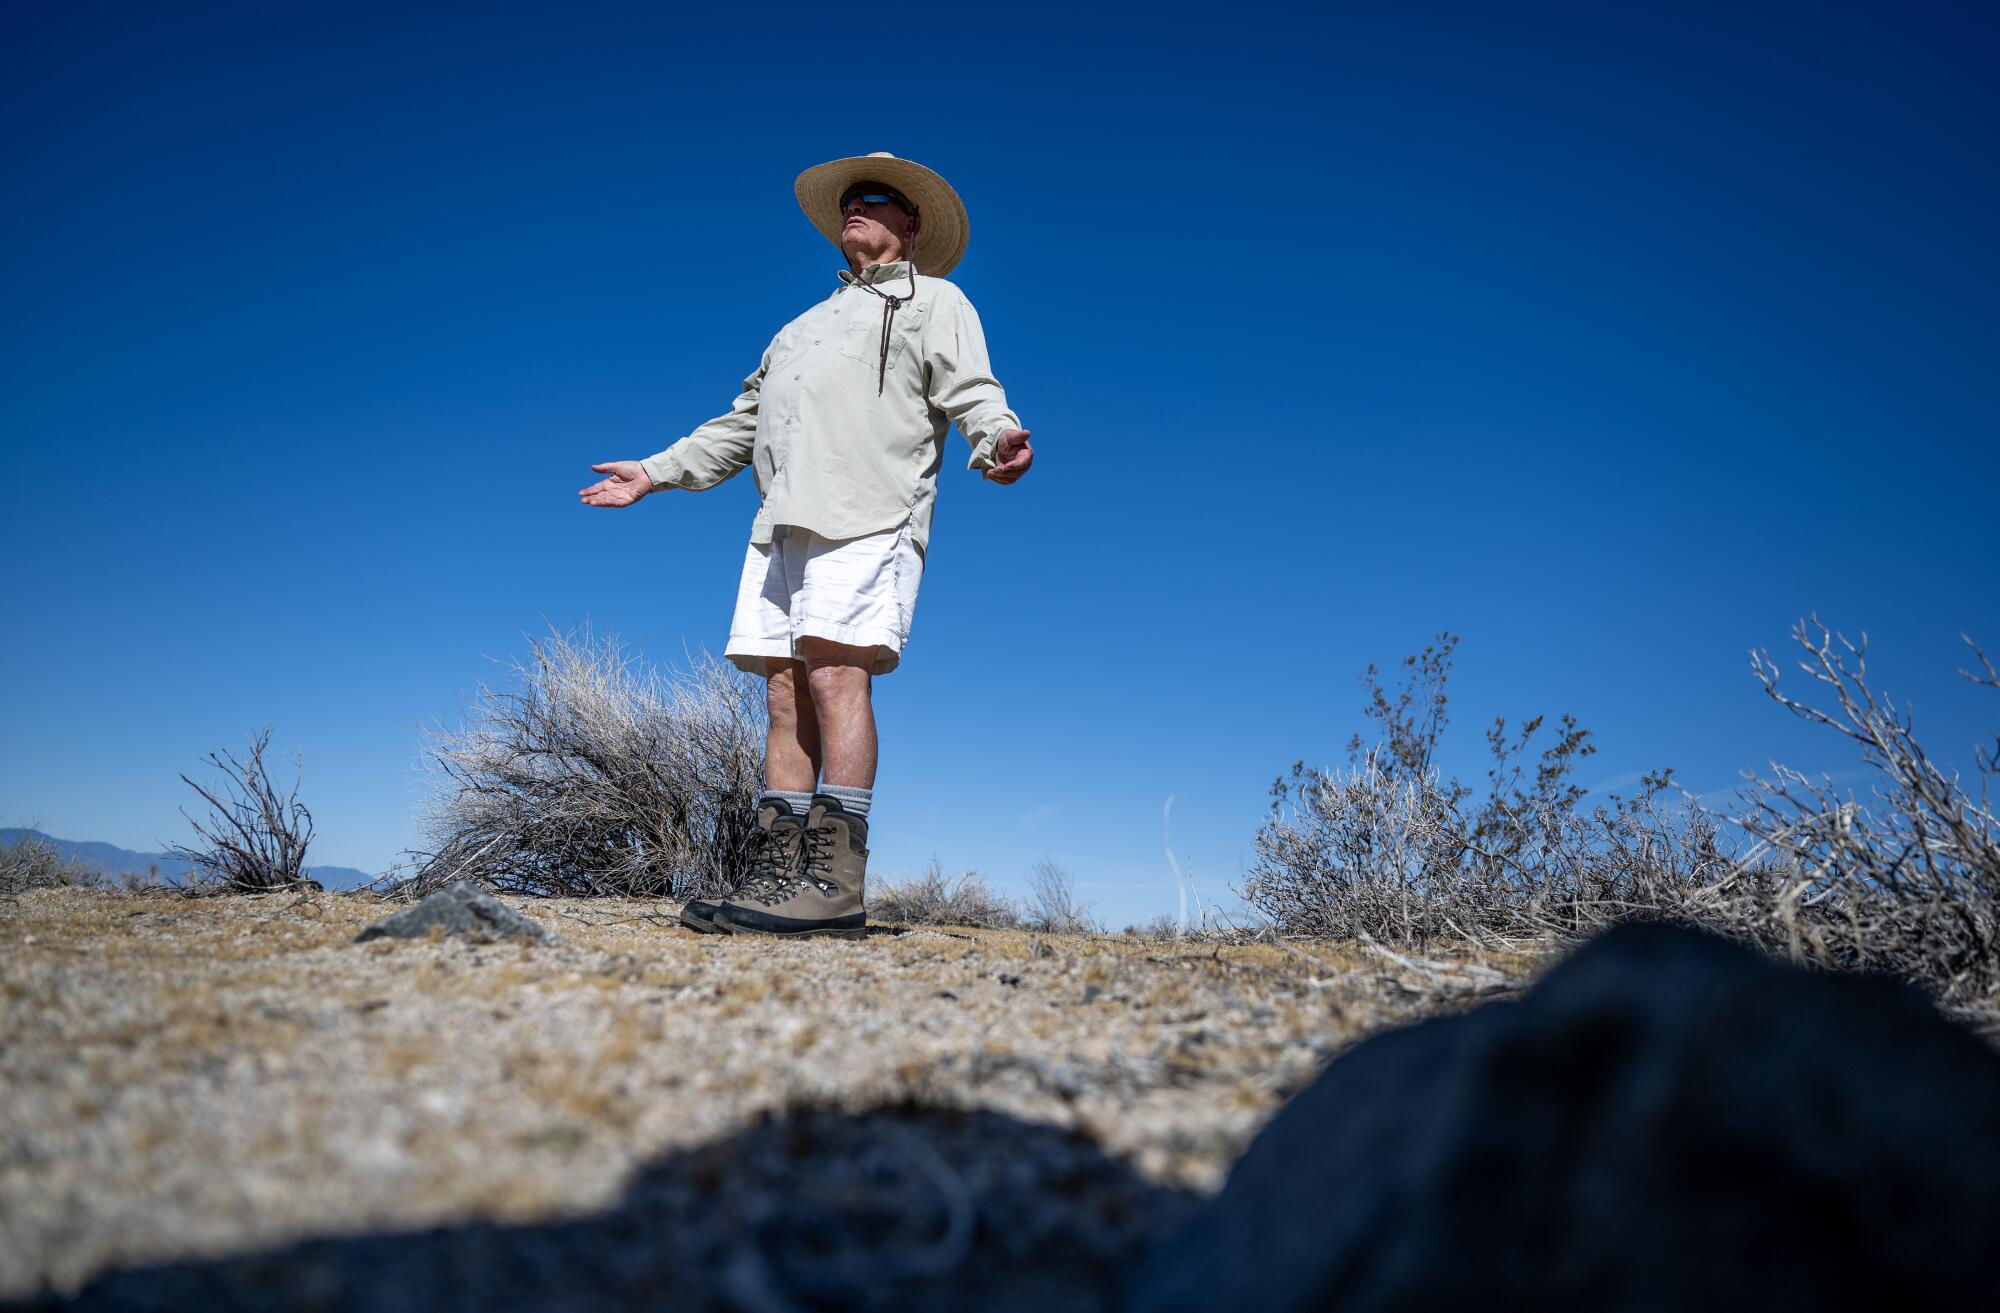 Jim Cornett at his study site filled with dead ironwood trees and barely surviving ocotillos.